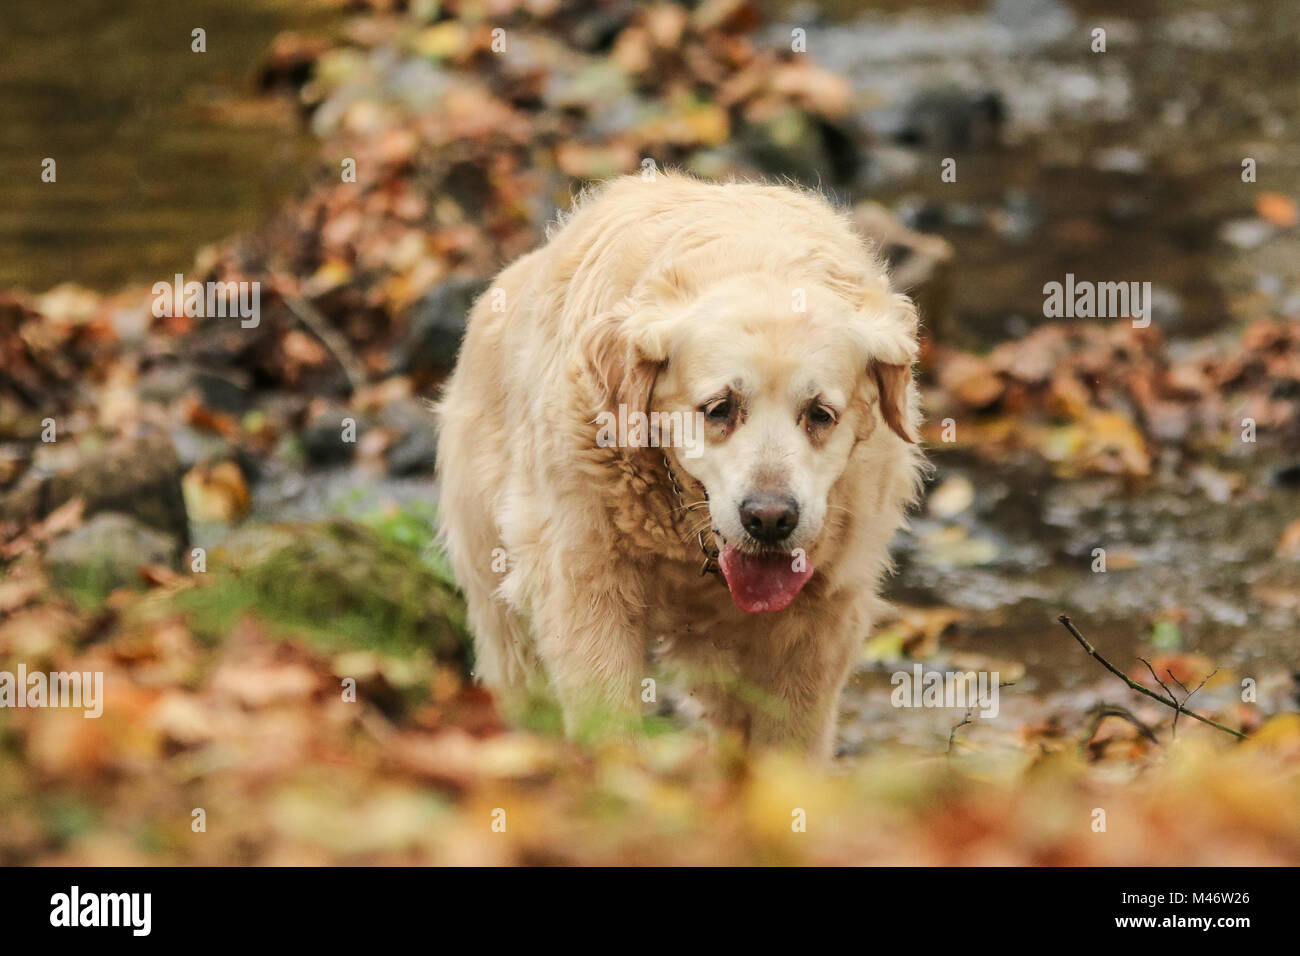 A picture of the old Labrador retriever dog. She is tired, looks sad, but inside she is happy to be outside. Stock Photo